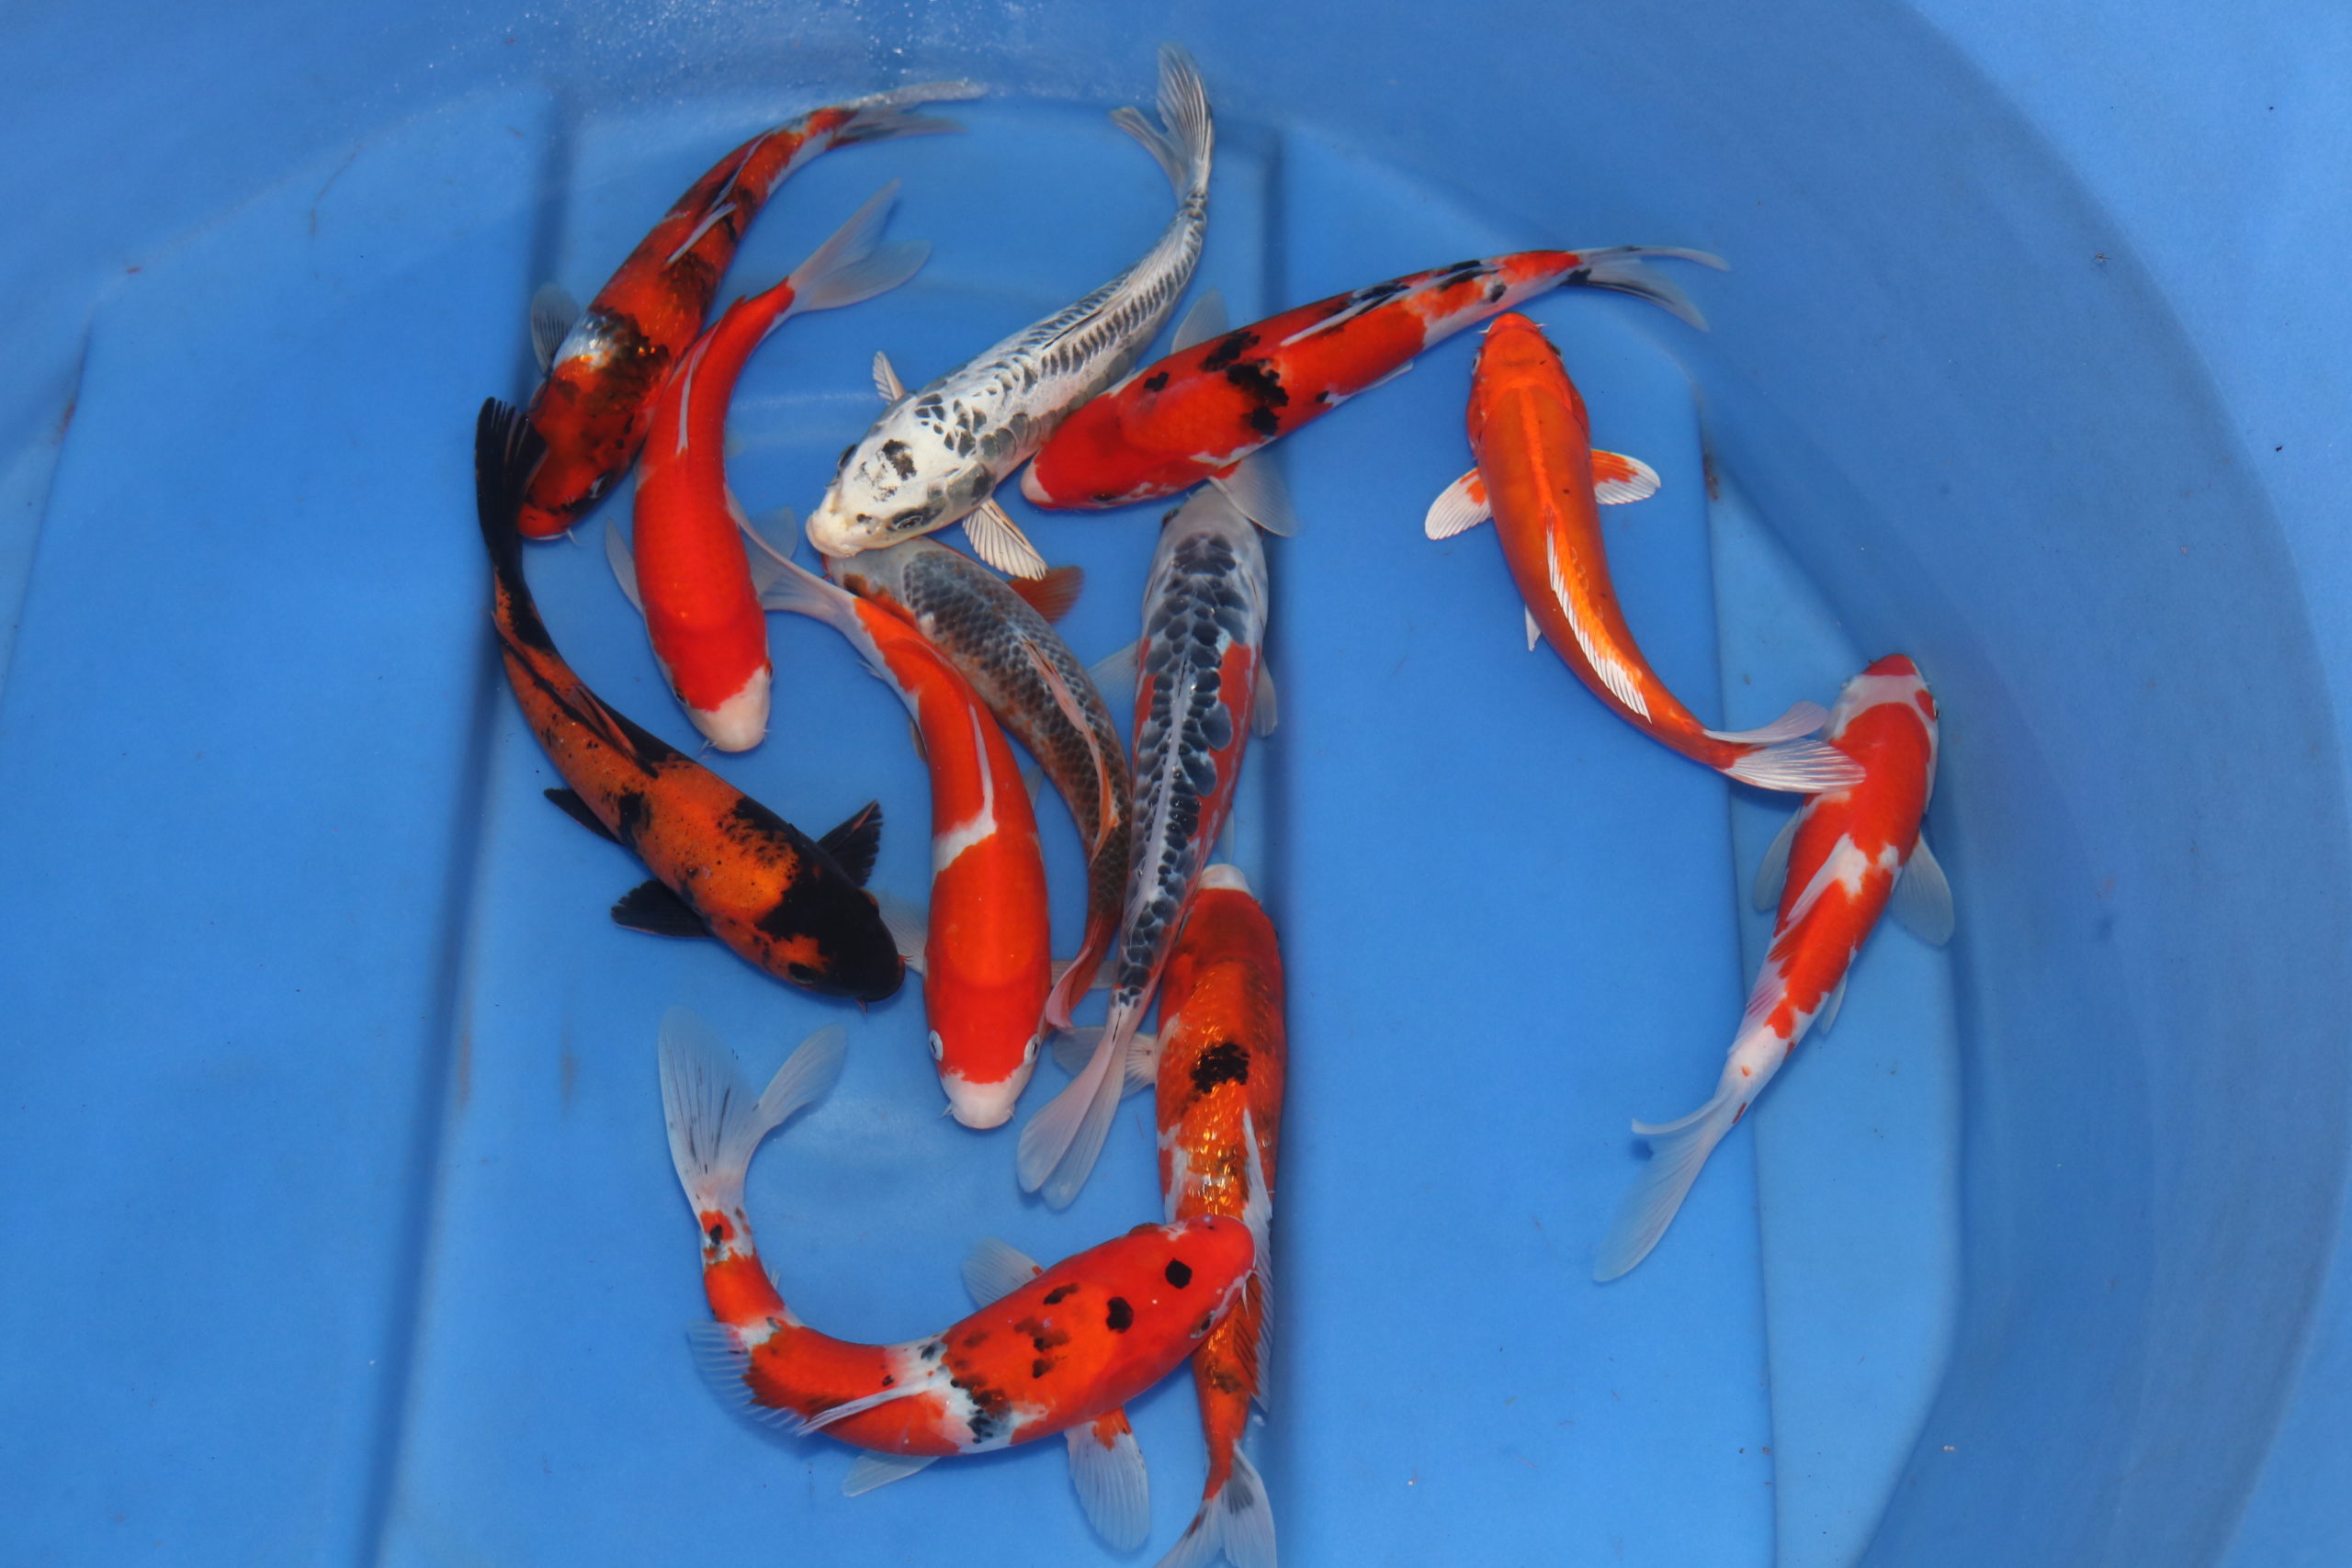 NH, KOI-Pond Fish For Sale, Fish Food Store, Supplies